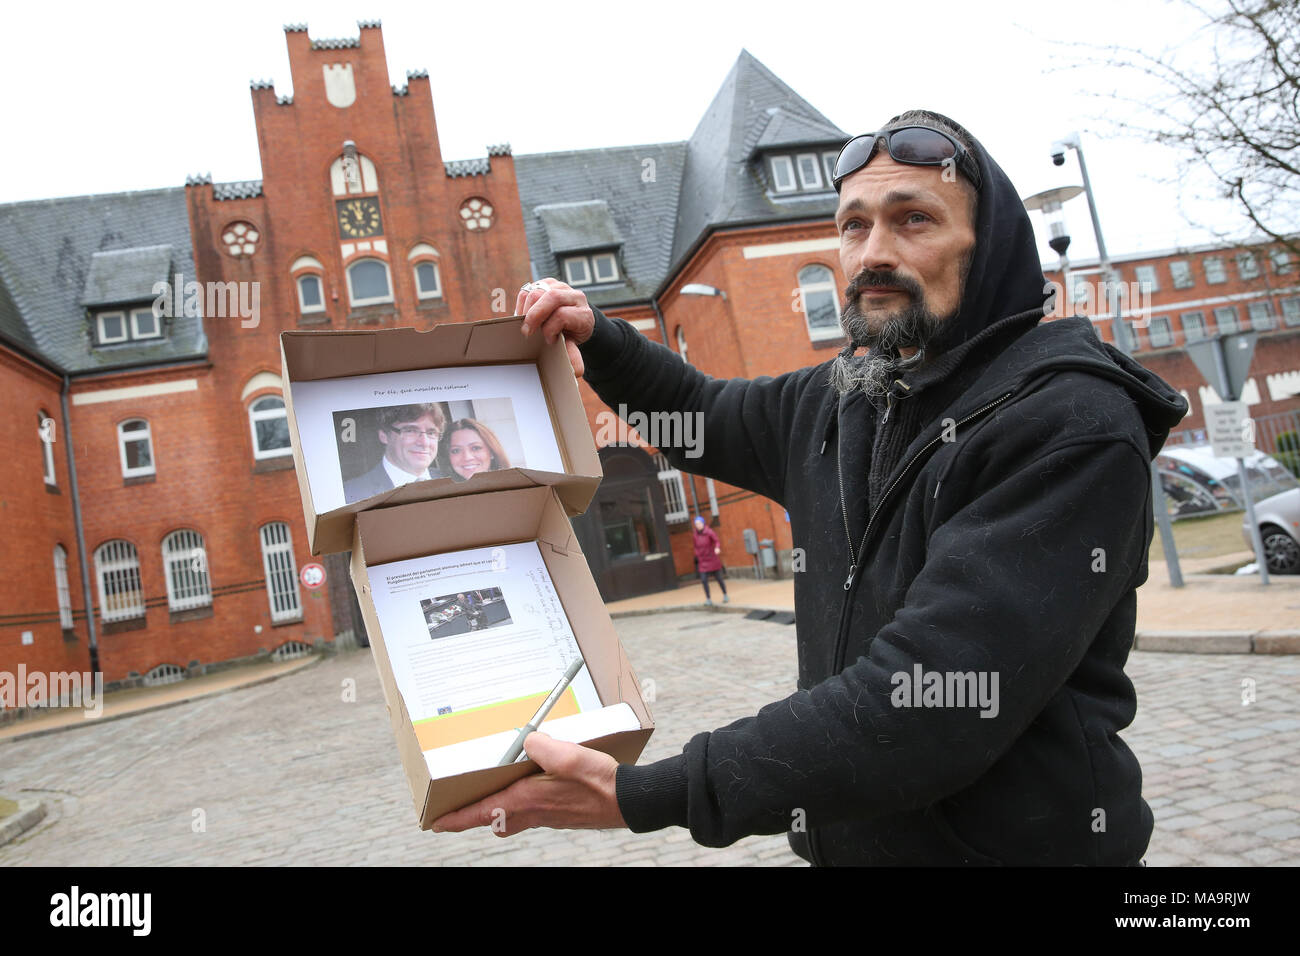 Neumuenster, Germany, 31 March 2018.Activist Gerdson Hengist standing with a "care package" in front of the correctional facility in Neumuenster, where Catalonia's former president Carles Puigdemont is currently in custody since 25 March. The attempt to deliver the package, containing newspaper articles and solidarity messages, failed. Photo: Bodo Marks/dpa Stock Photo